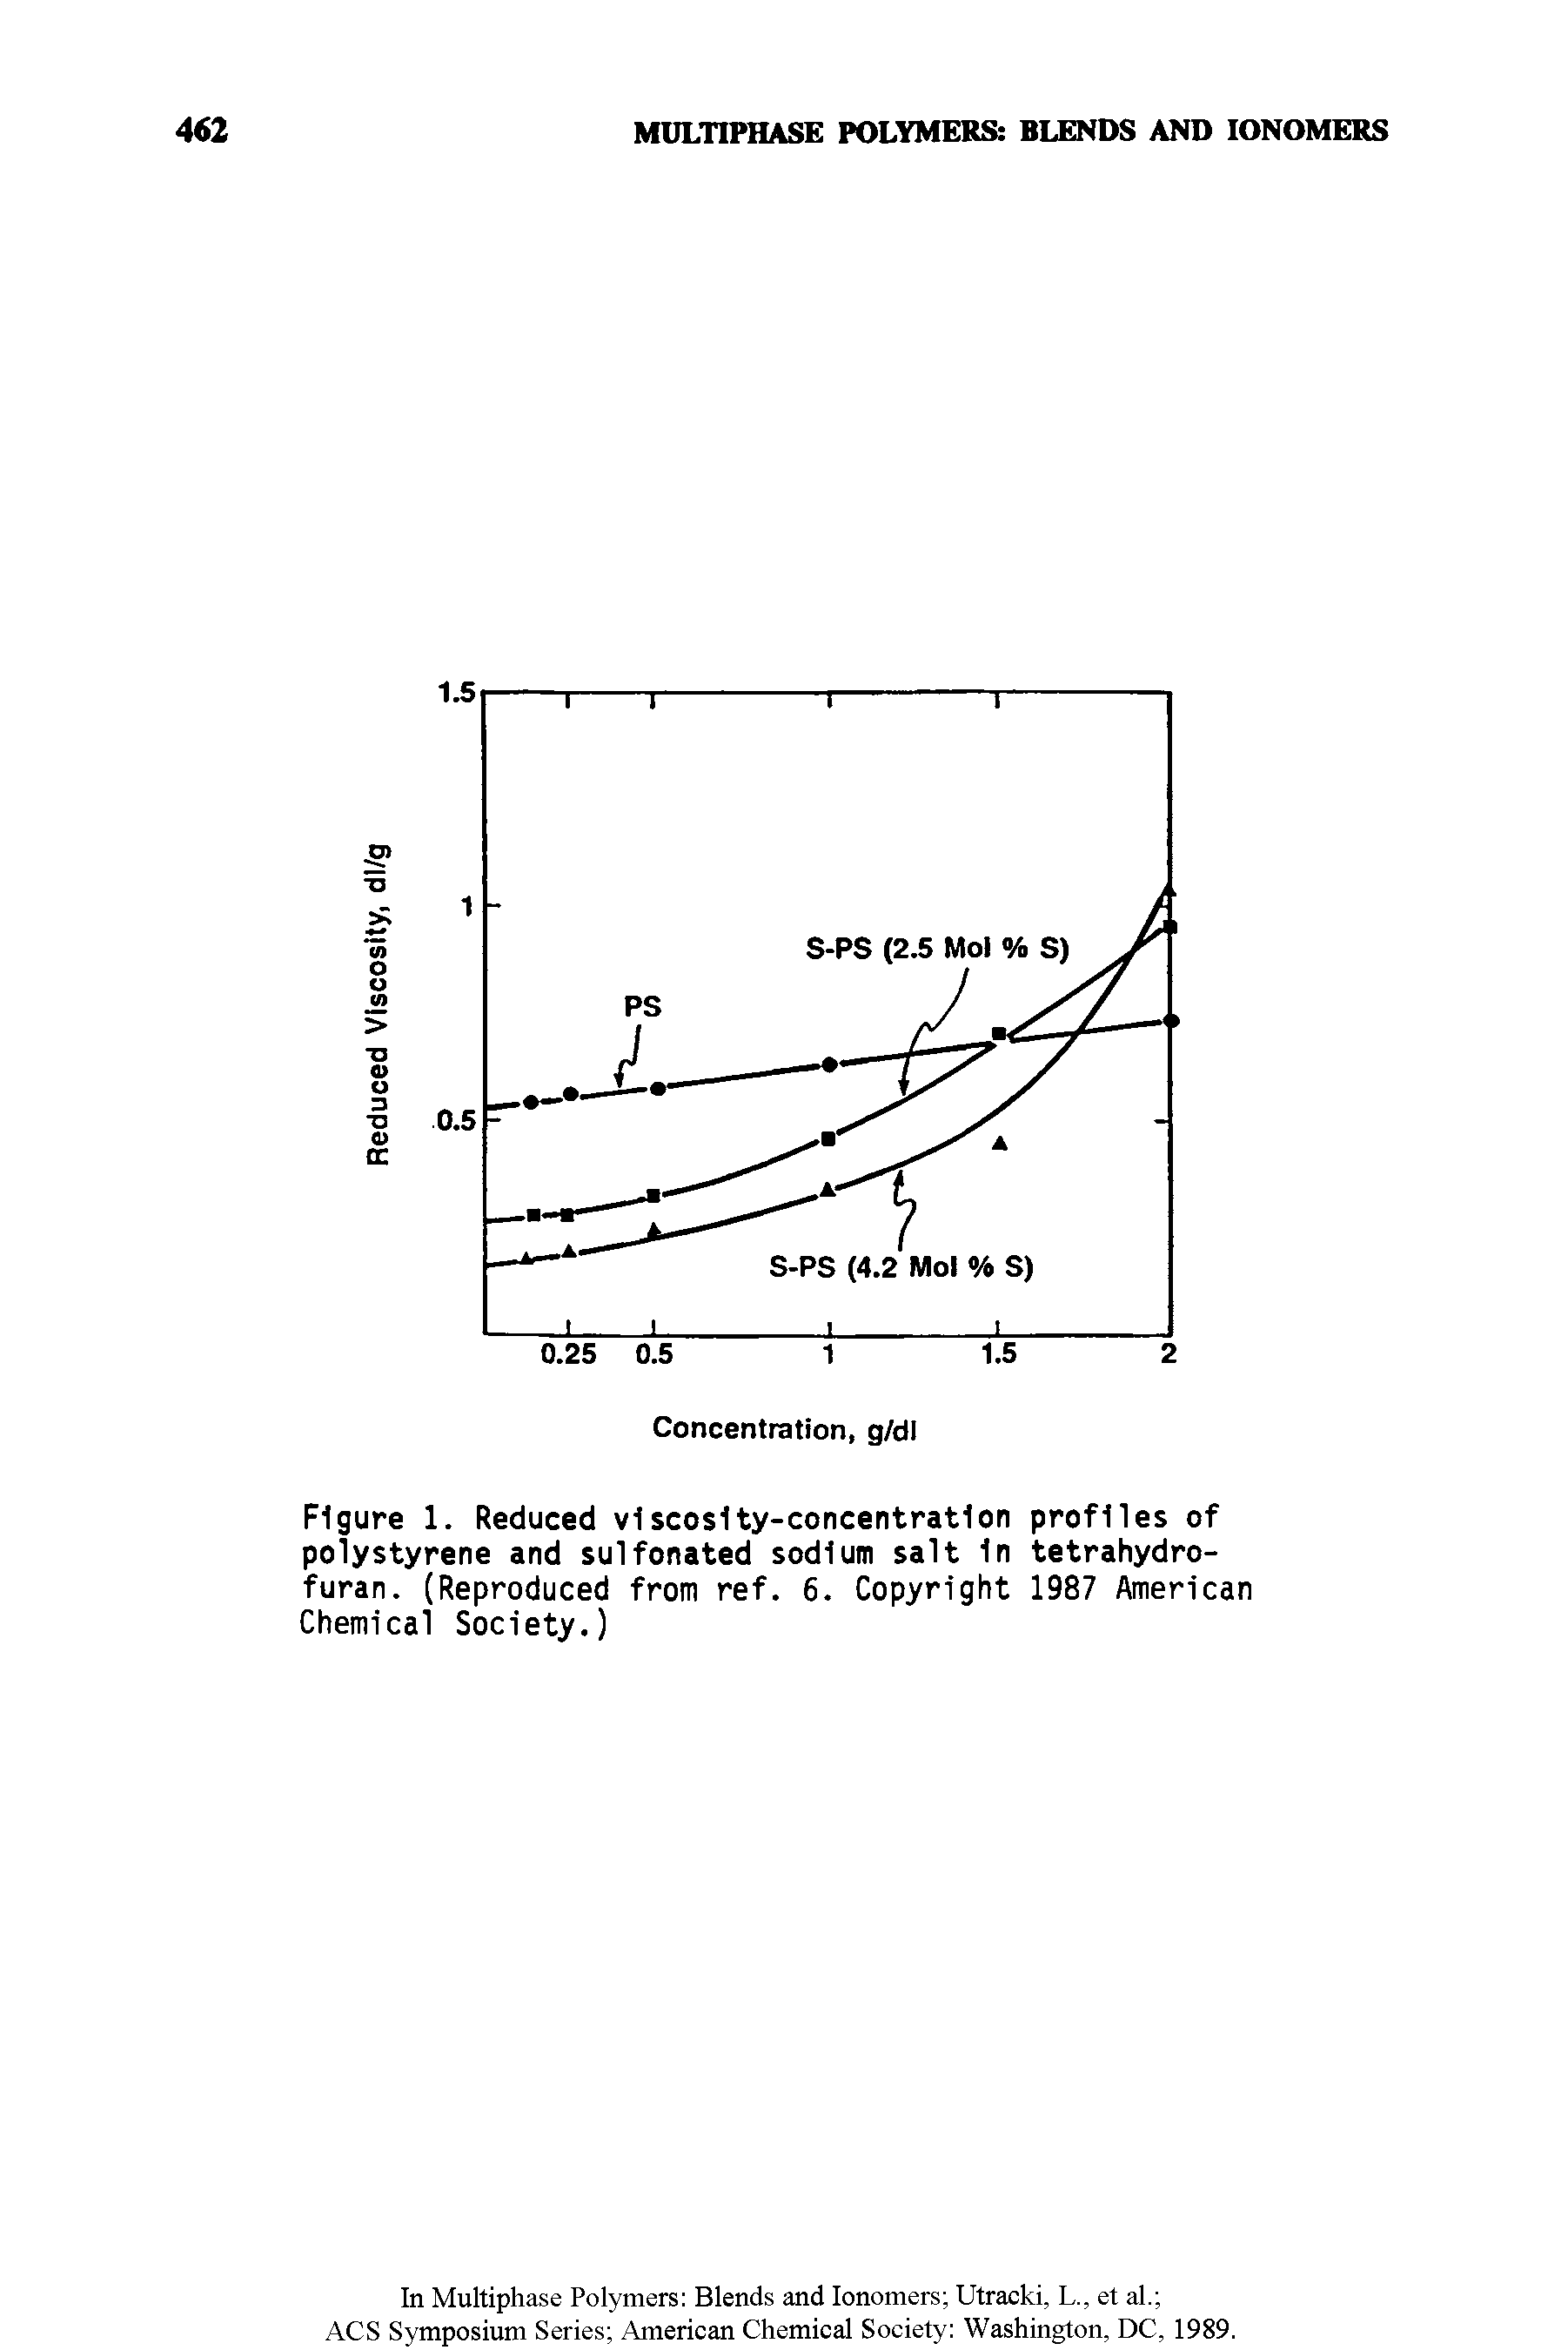 Figure 1. Reduced viscosity-concentration profiles of polystyrene and sulfonated sodium salt In tetrahydrofuran. (Reproduced from ref. 6. Copyright 1987 American Chemical Society.)...